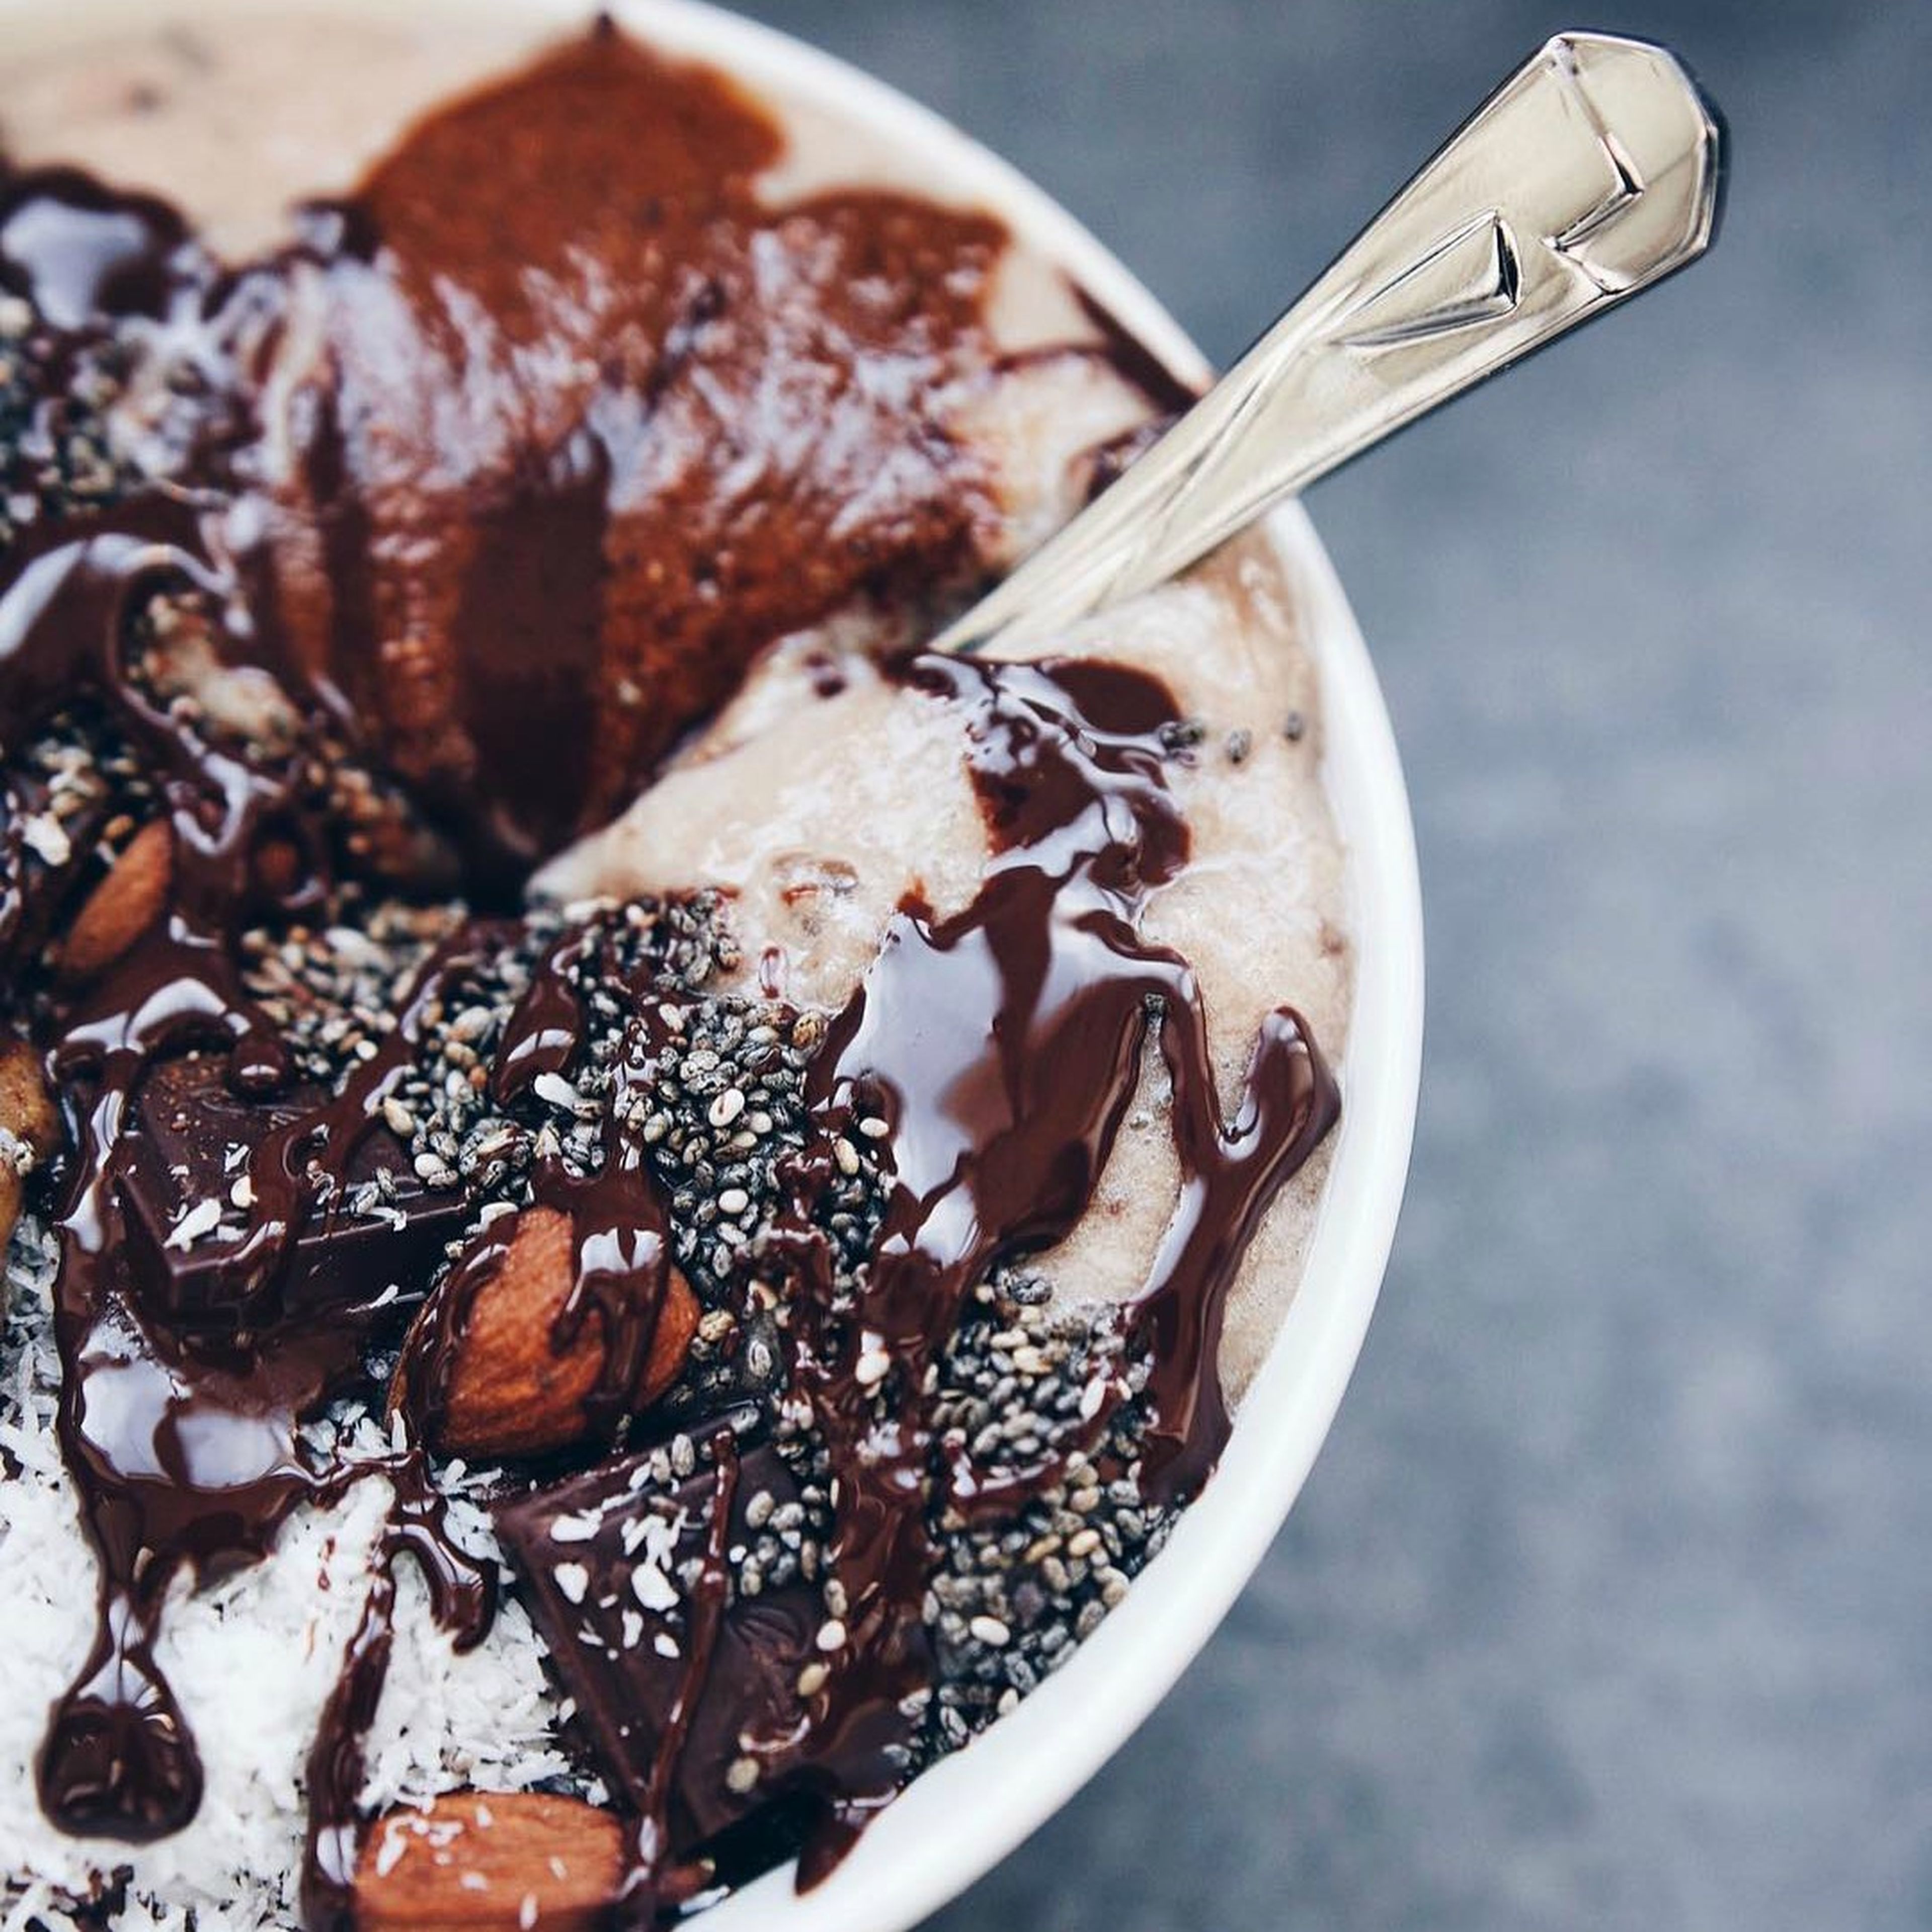 Chocolate banana bread in a bowl